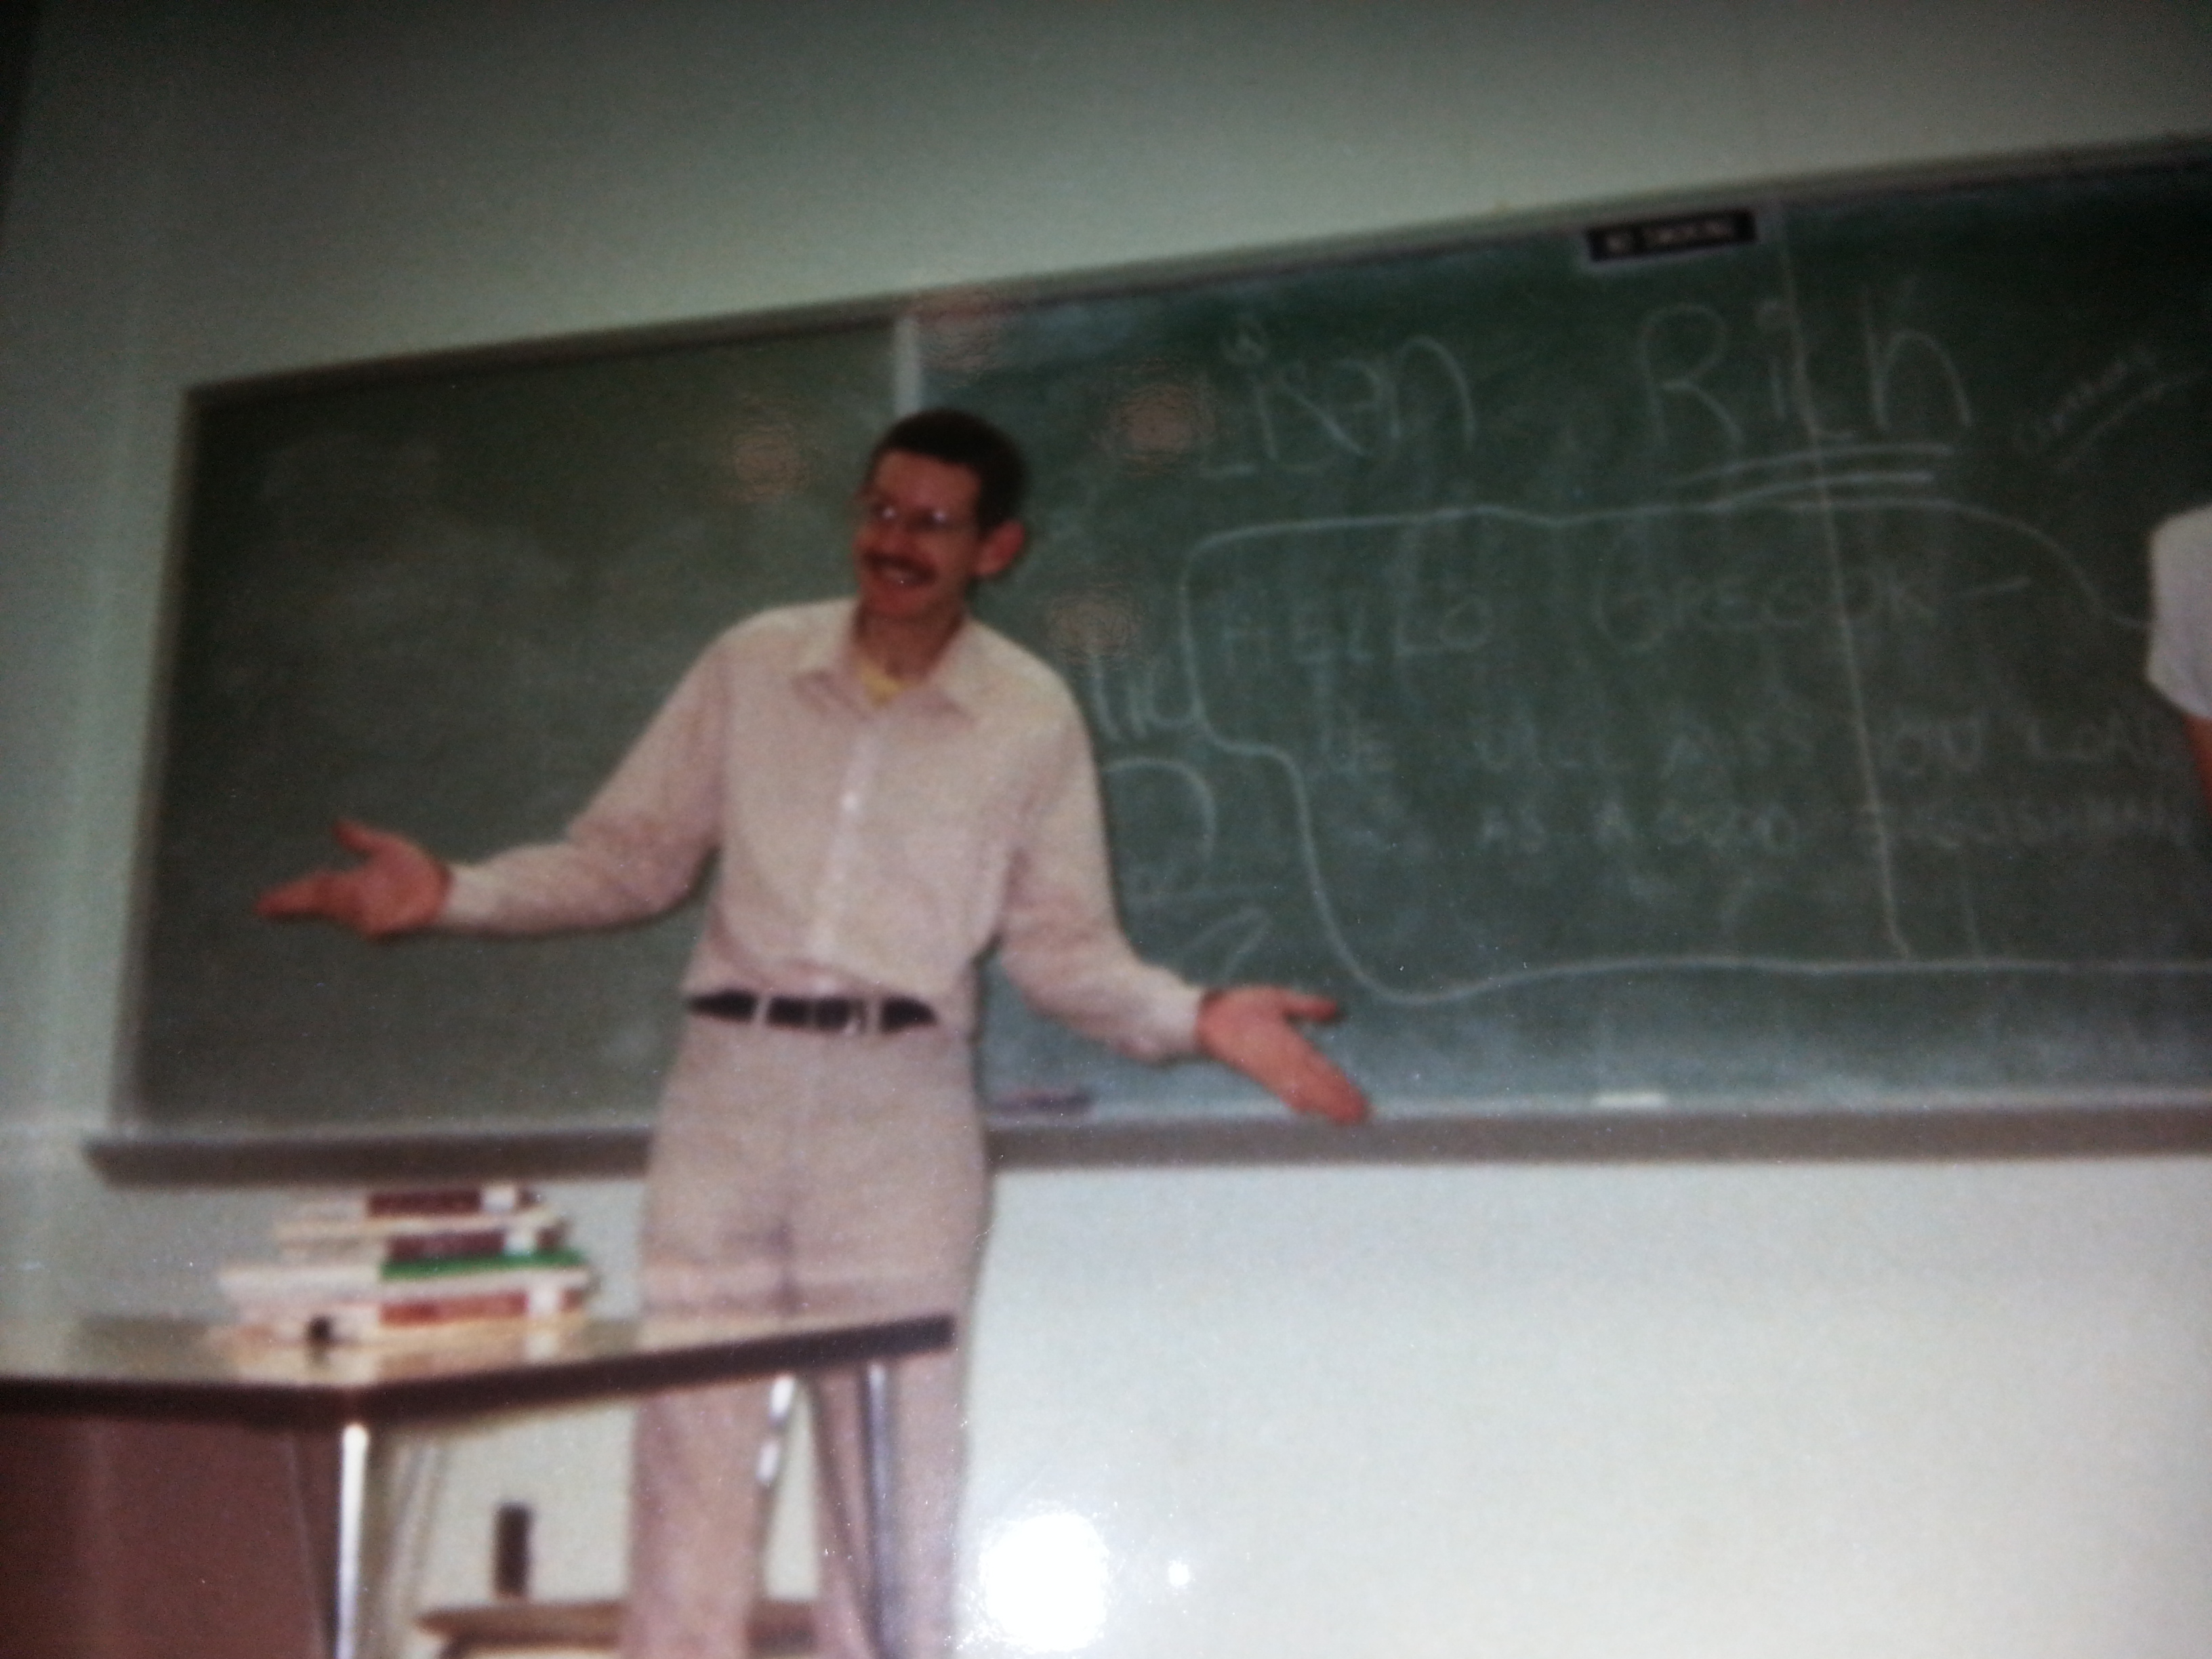 The day I fell in love with languages: Dr. Richter and field